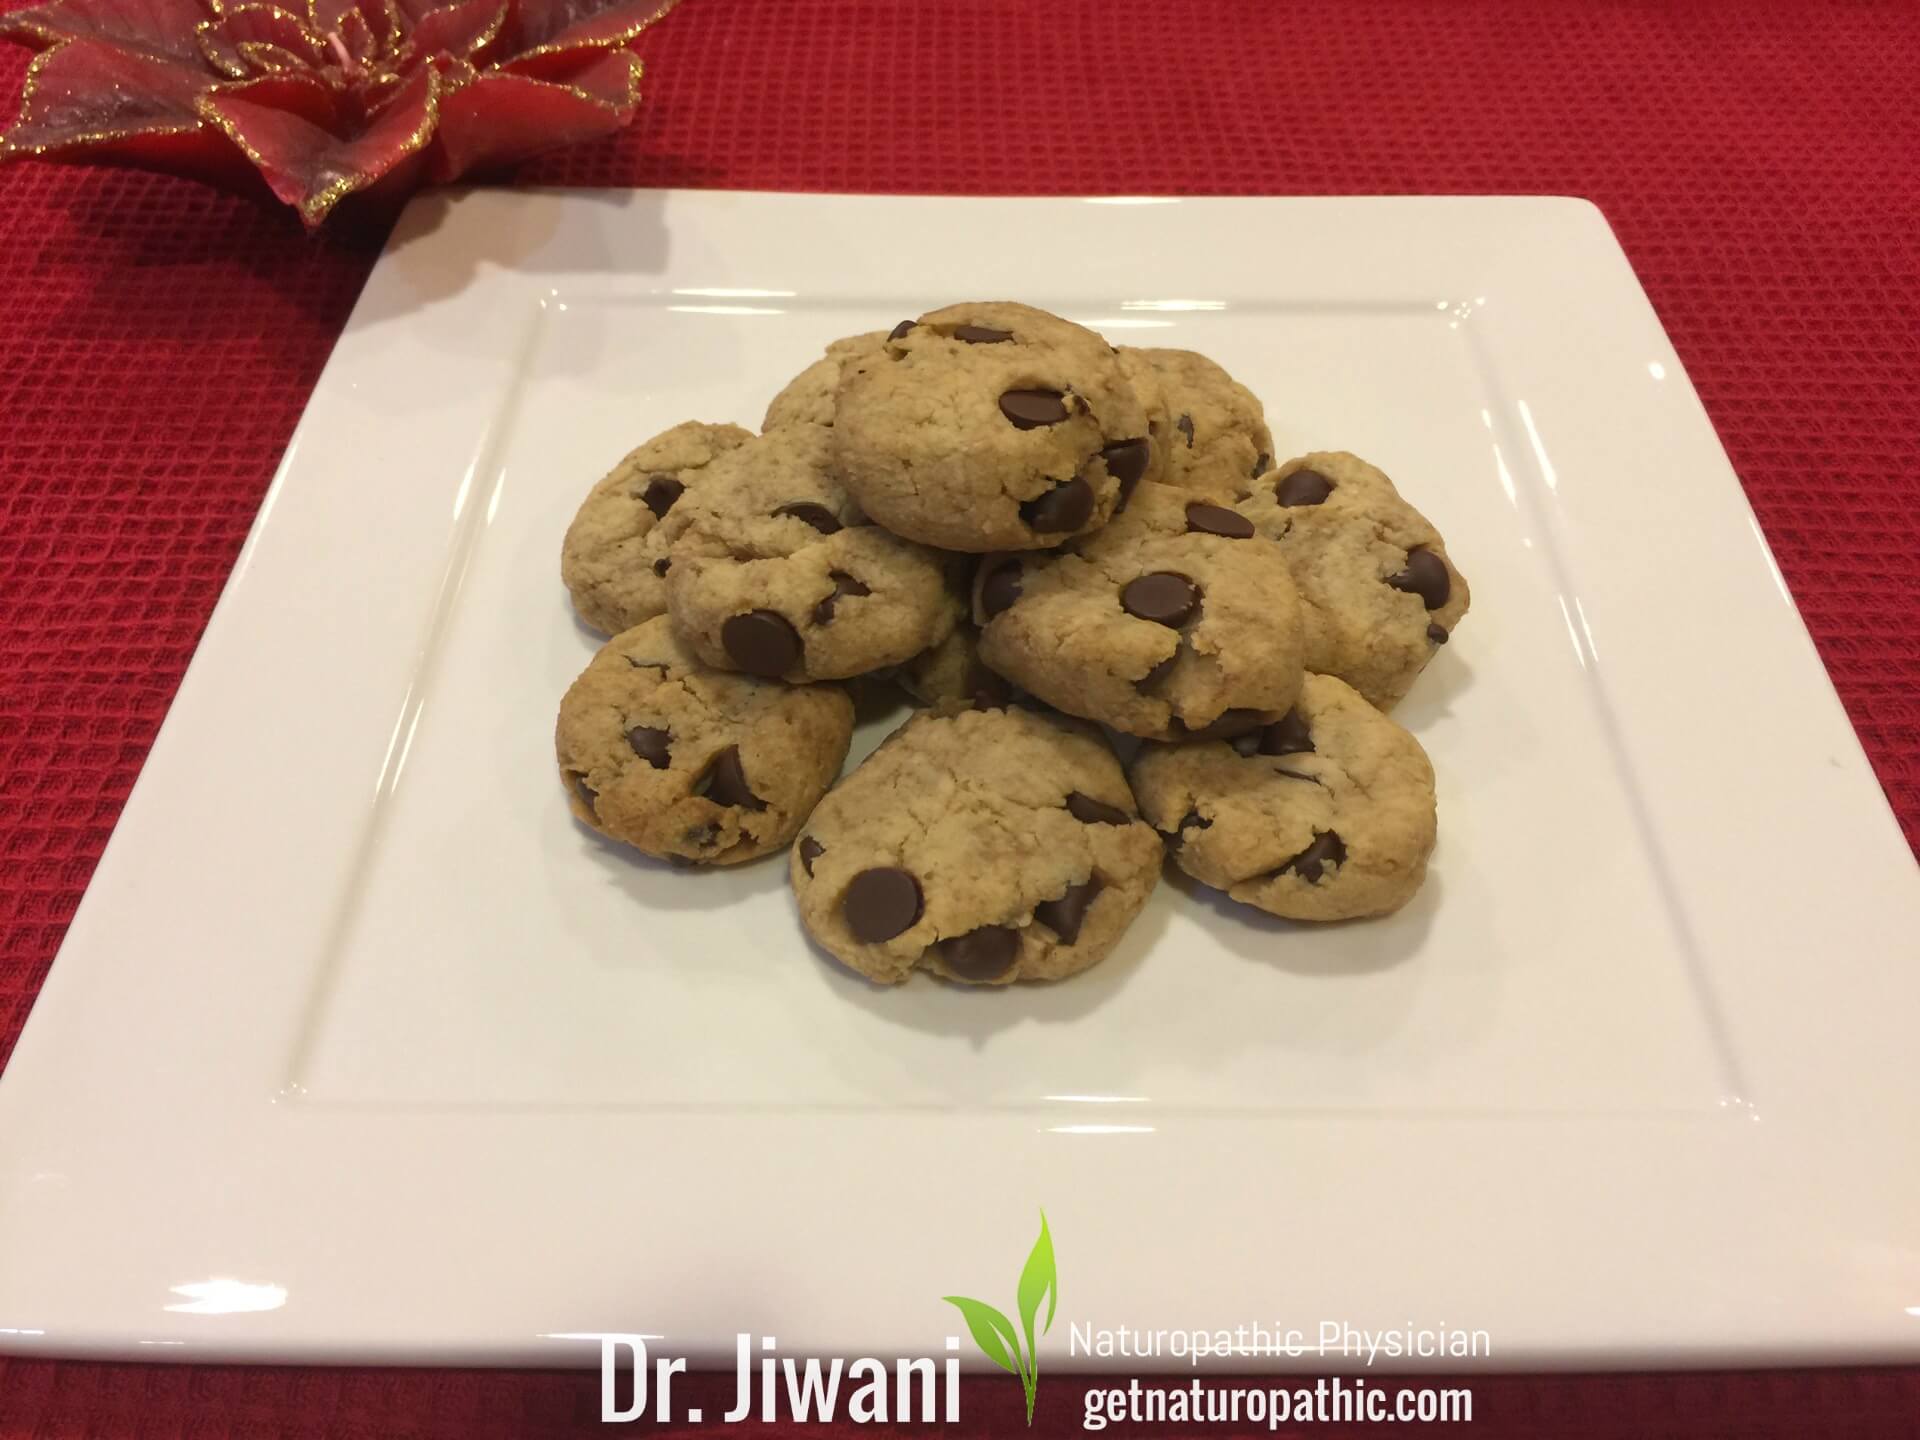 Dr. Jiwani's Guilt-Free Chocolate Chip Cookies: Low Carb, Gluten-Free, Egg-Free, Dairy-Free, Soy-Free, Corn-Free, Ideal For Vegan, Paleo, Keto, Diabetic & Candida Diets | Dr. Jiwani's Naturopathic Nuggets Blog